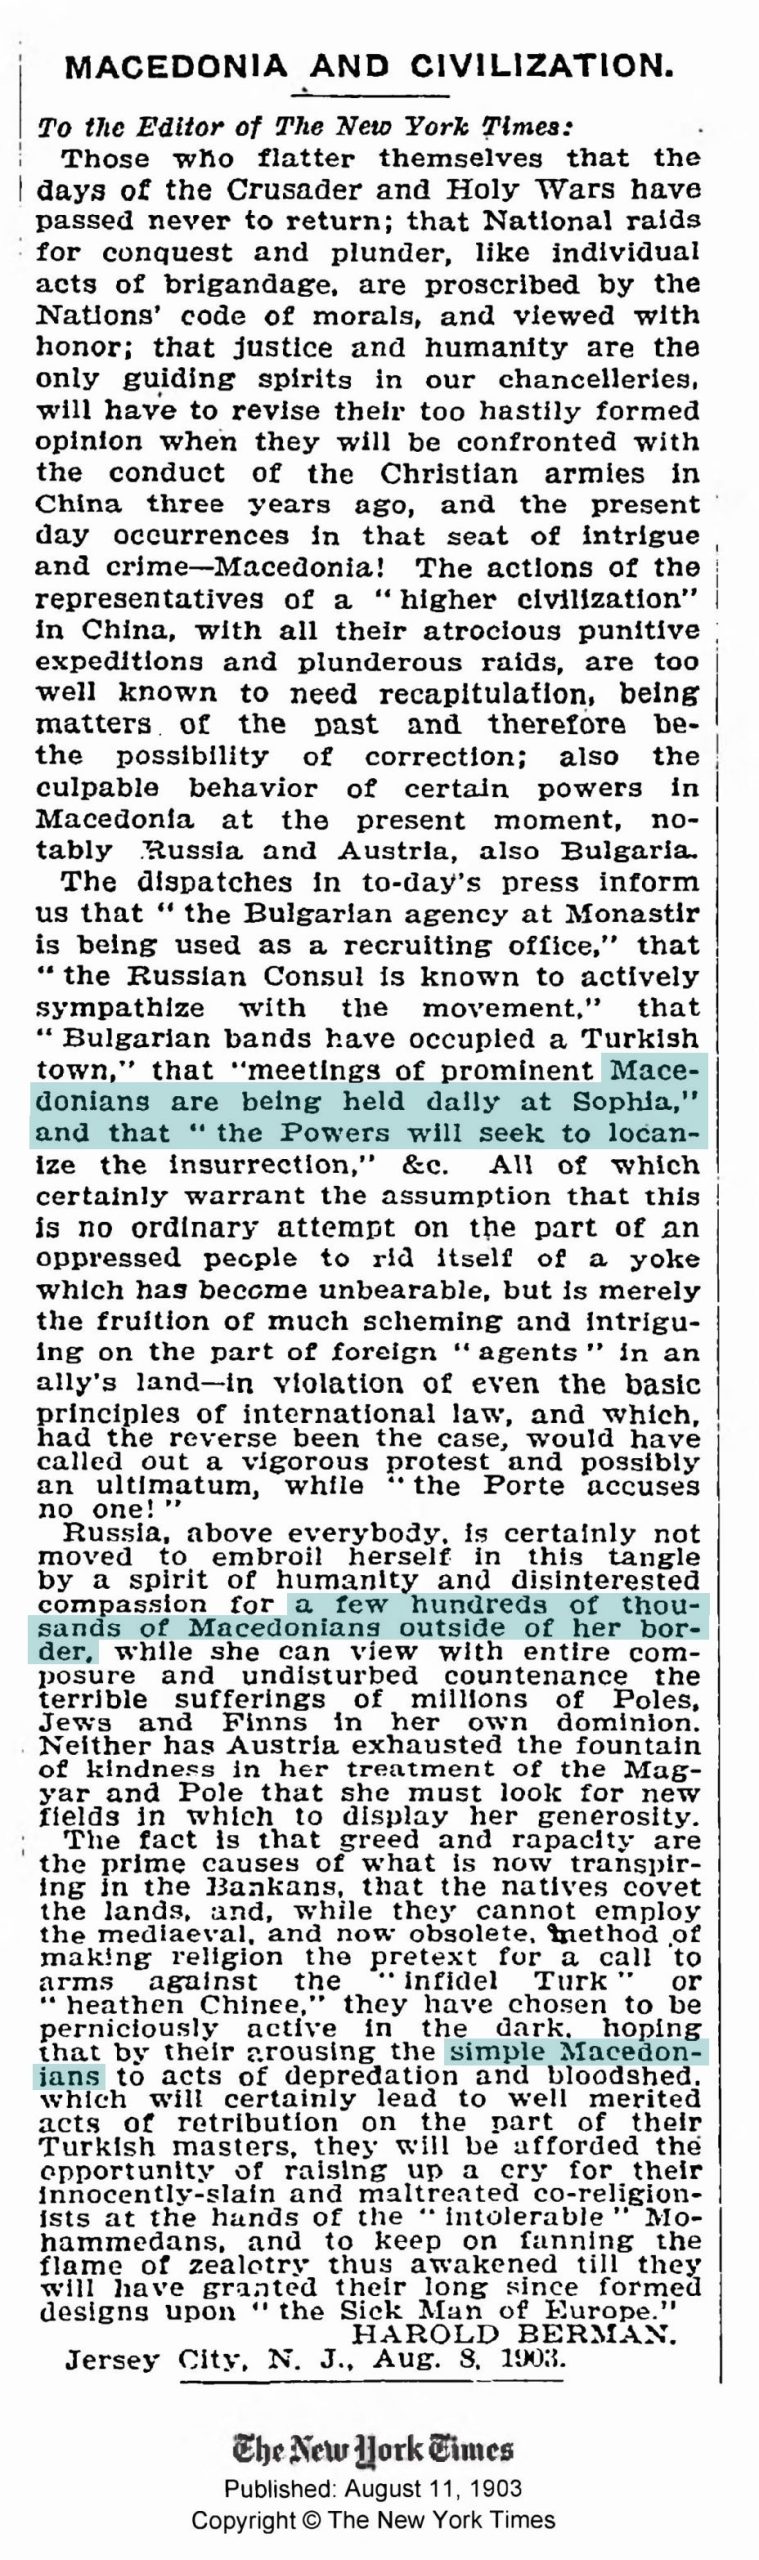 1903.08.11_The New York Times - Macedonia and civilization